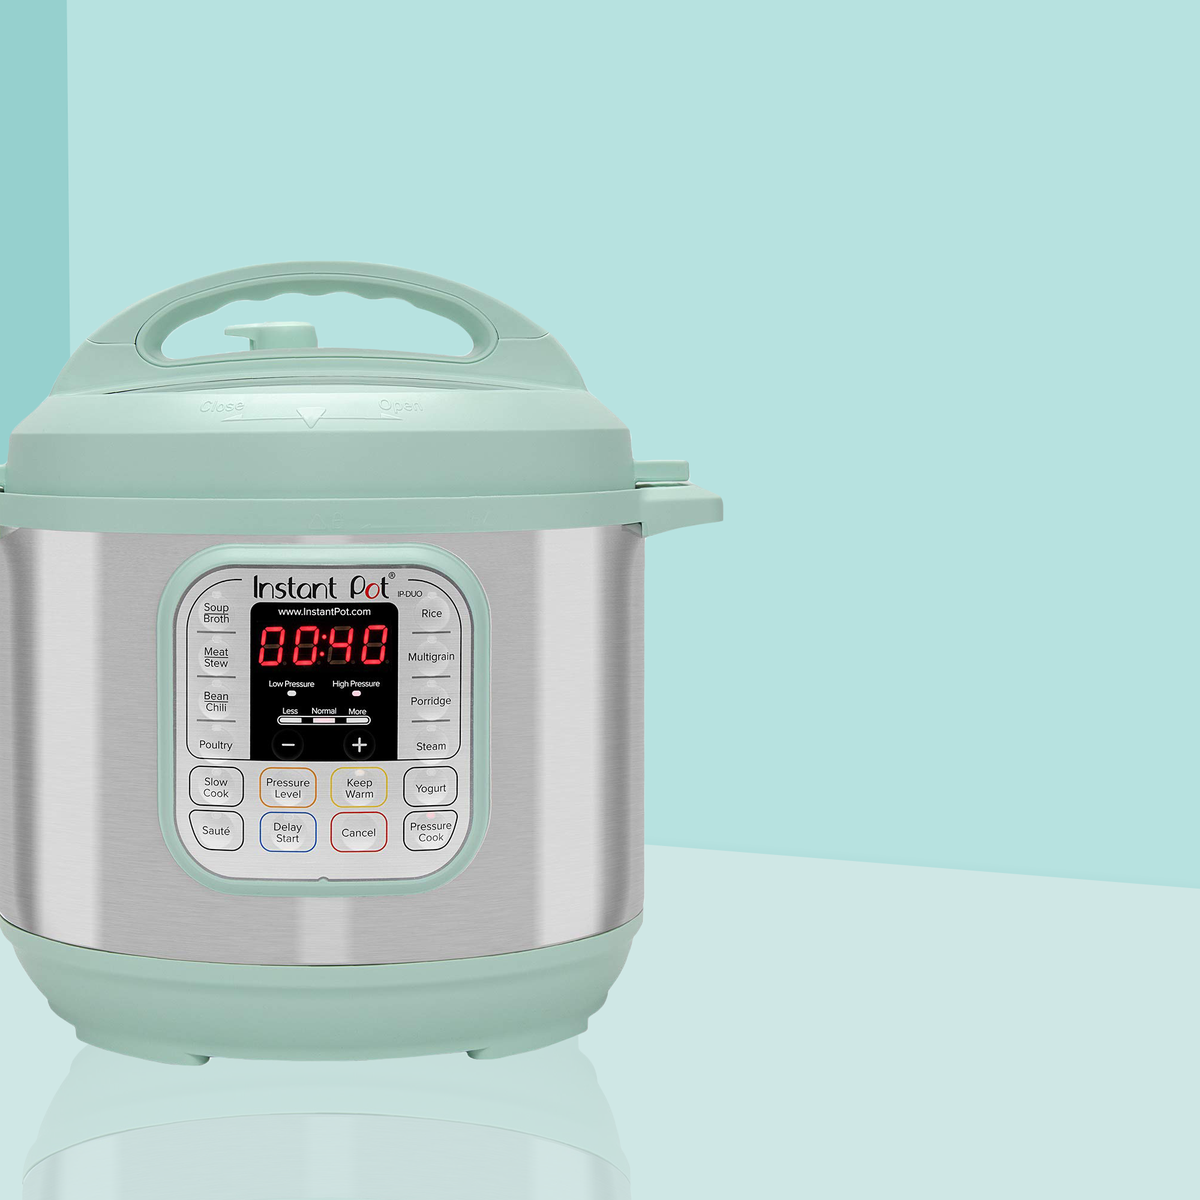 https://hips.hearstapps.com/hmg-prod/images/190815-ghi-instant-pot-1565886200.png?crop=0.500xw:1.00xh;0.128xw,0&resize=1200:*